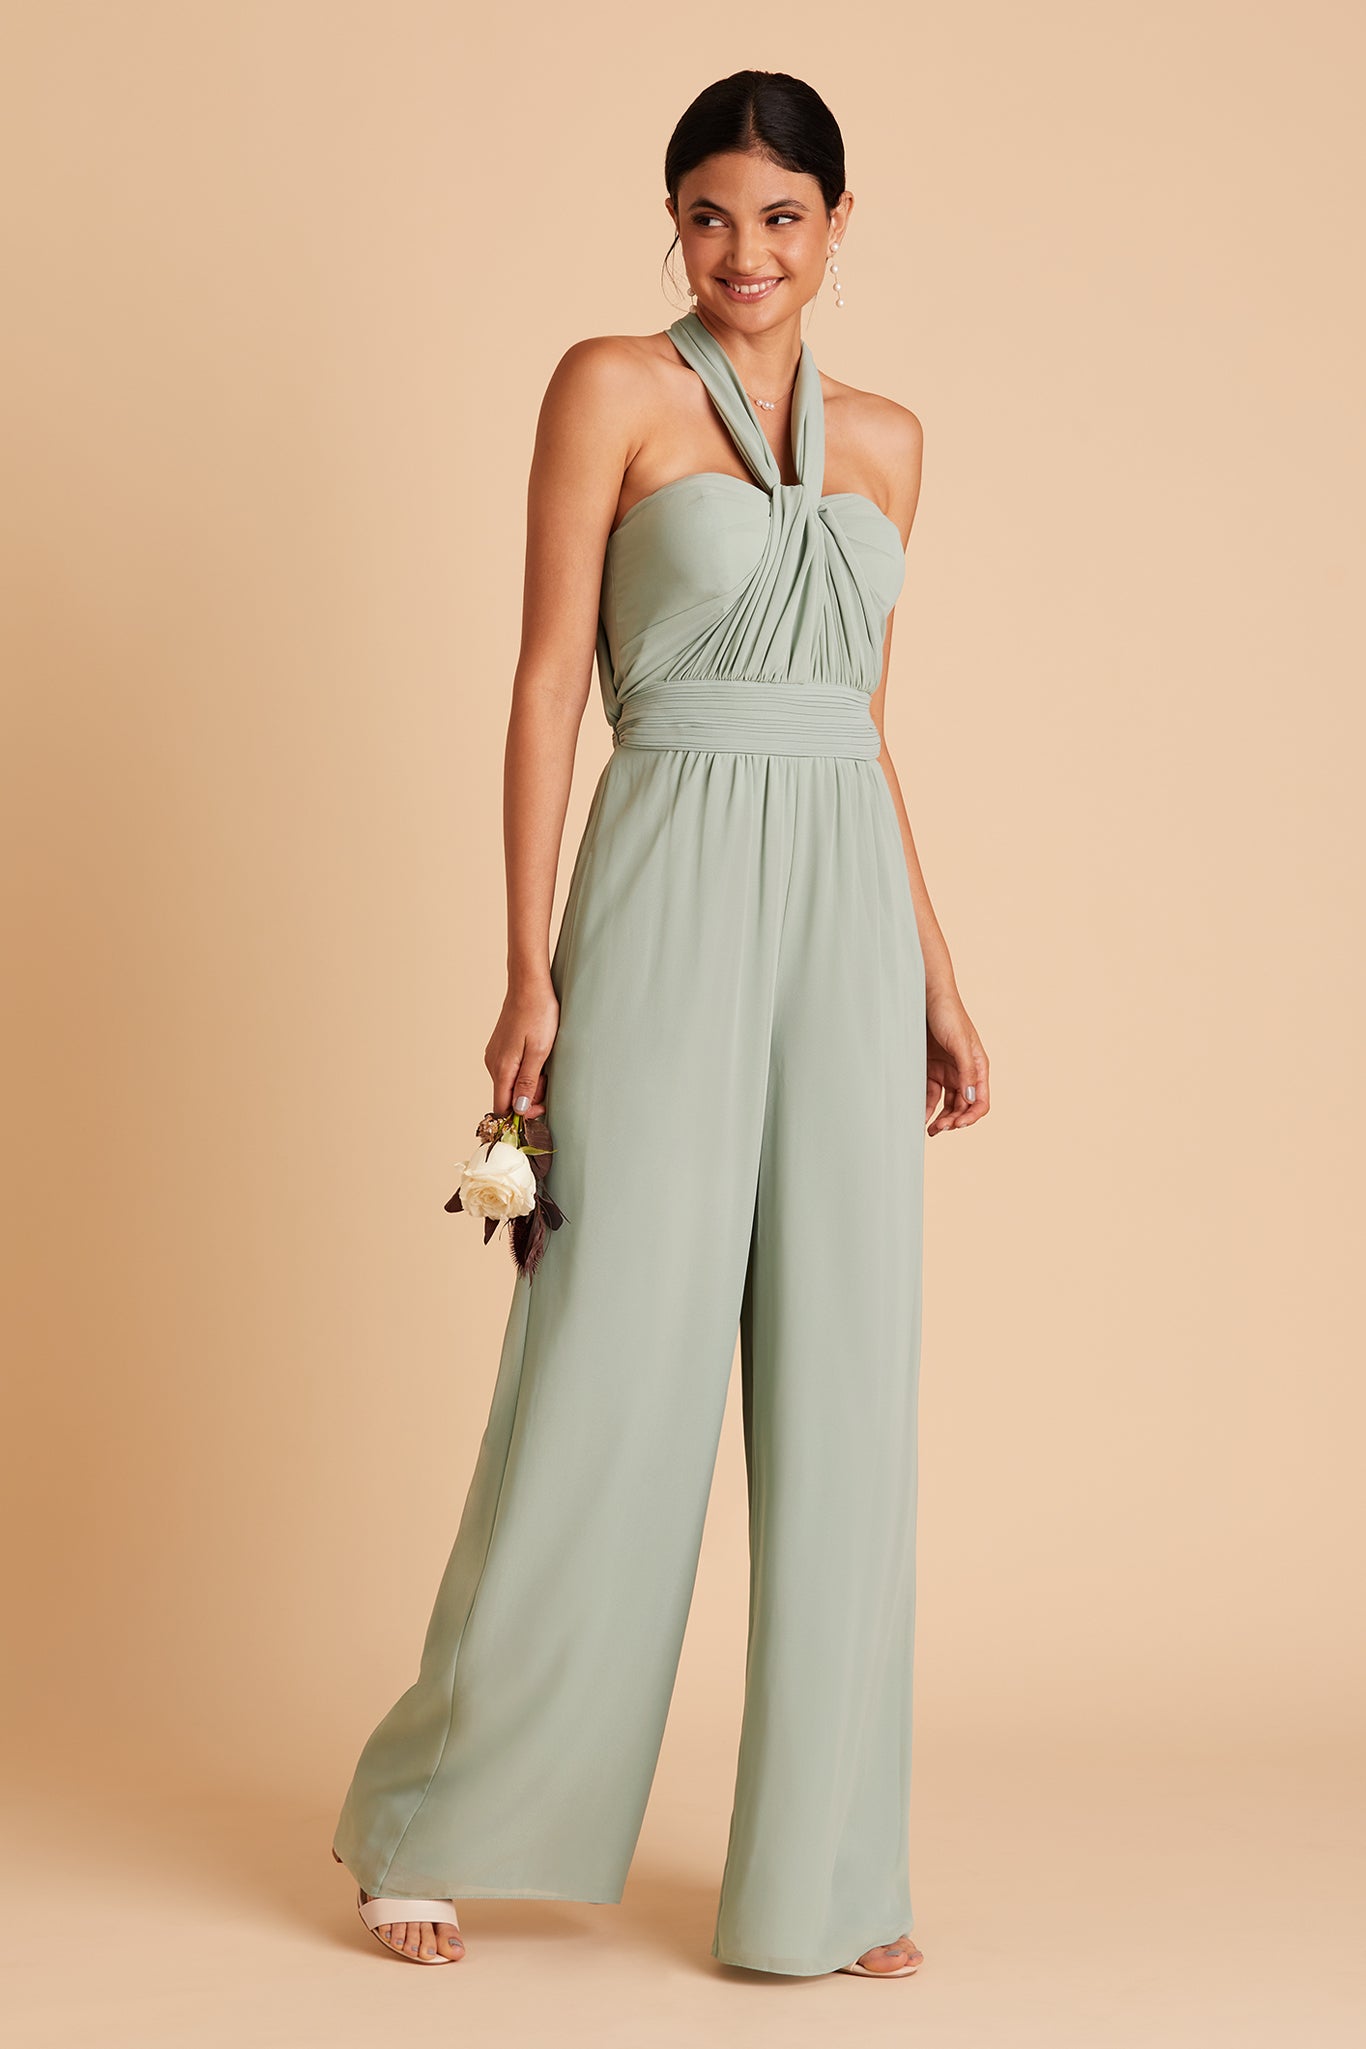 Gigi convertible jumpsuit in sage chiffon by Birdy Grey, front view